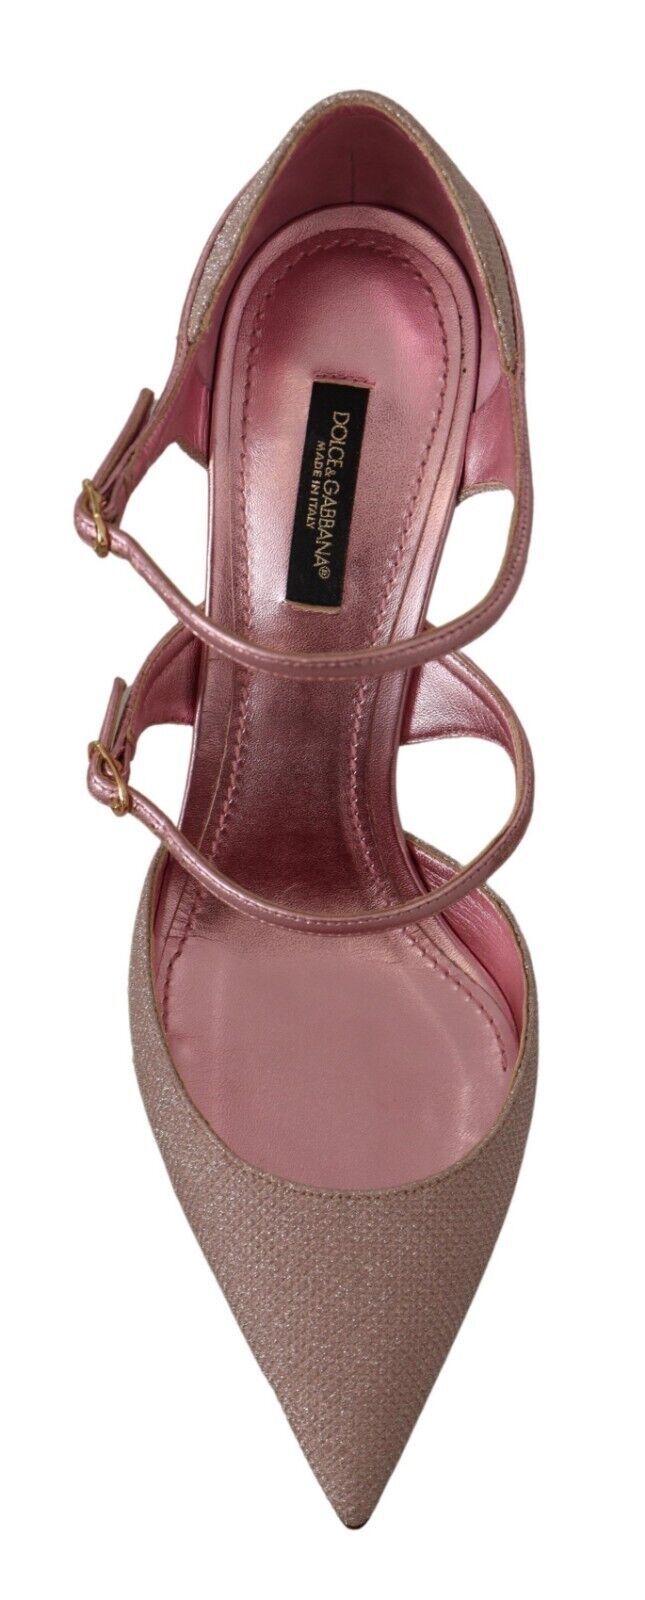 a pair of pink high heels with straps